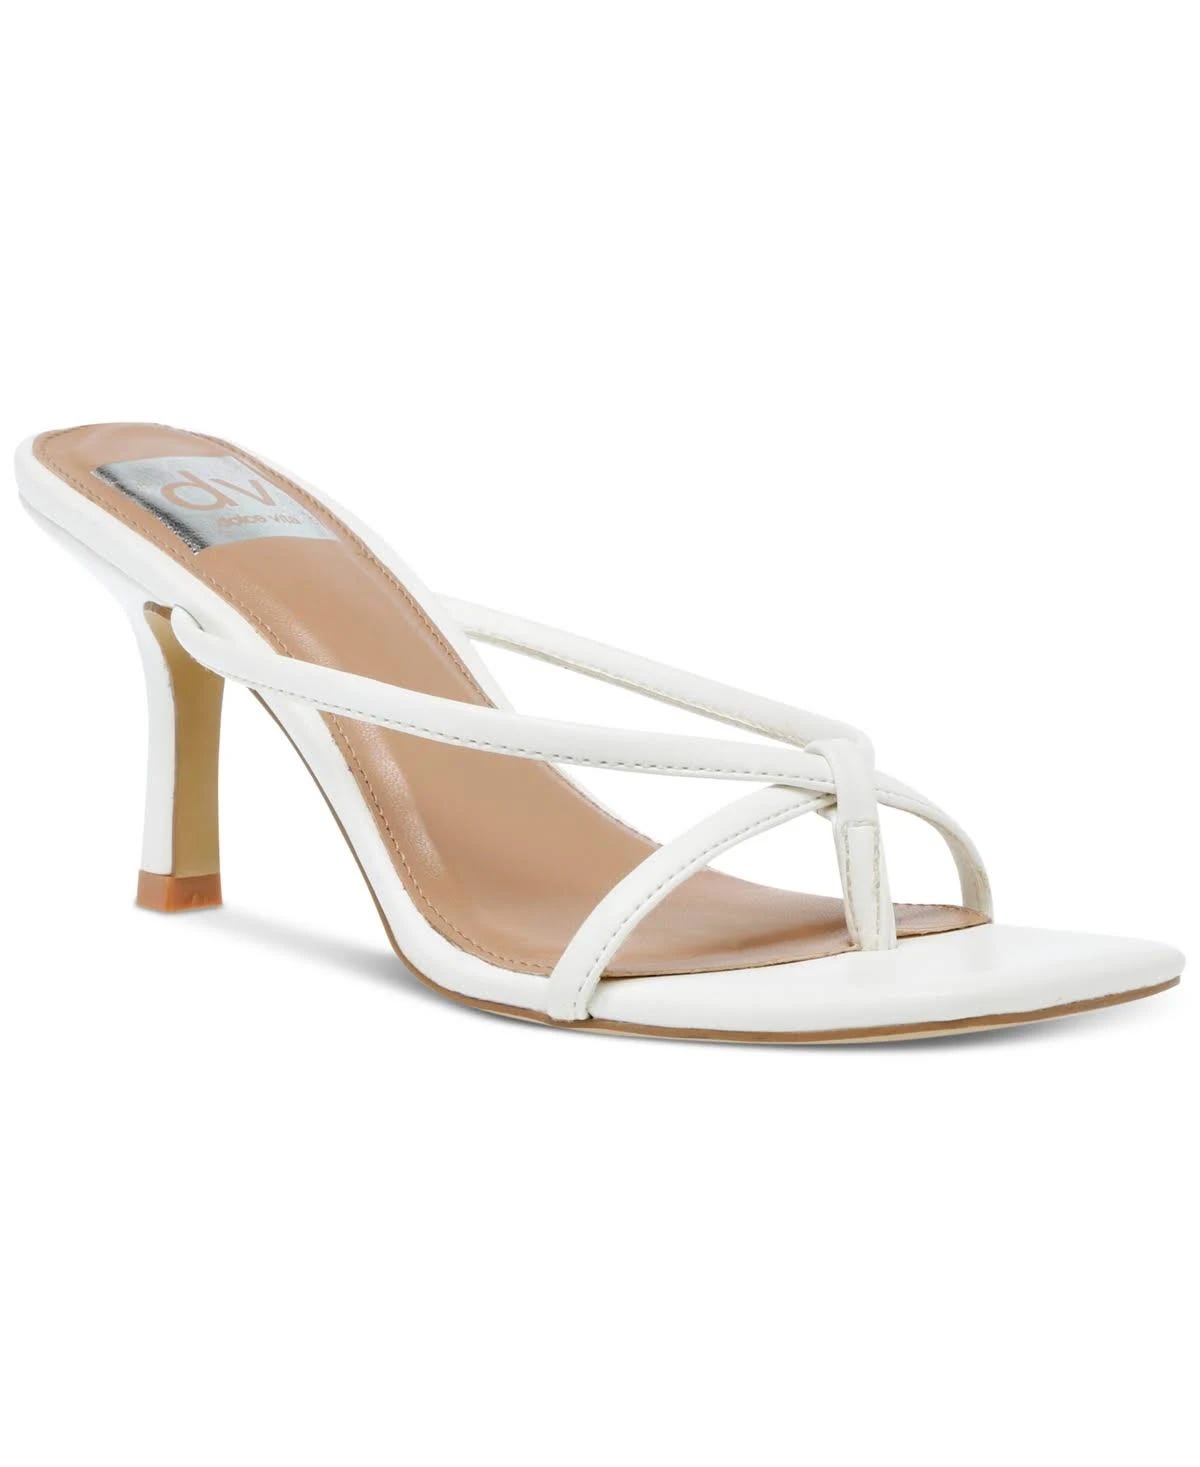 Strappy White Heels for Women - NZ Sizing | Image